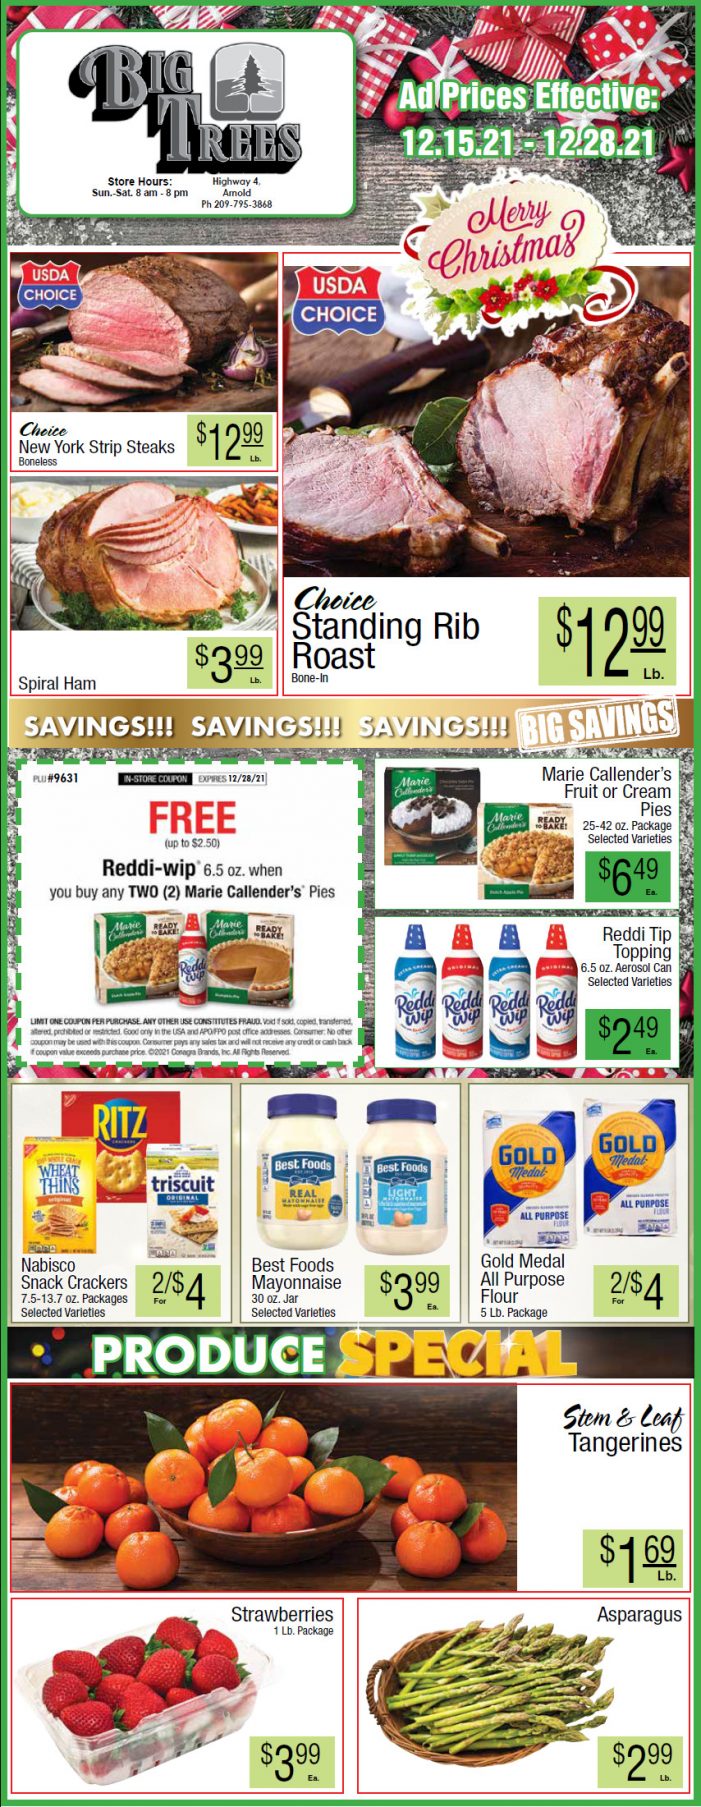 Big Trees Market Weekly Ad & Grocery Specials Through December 28th!  Shop Local & Save!